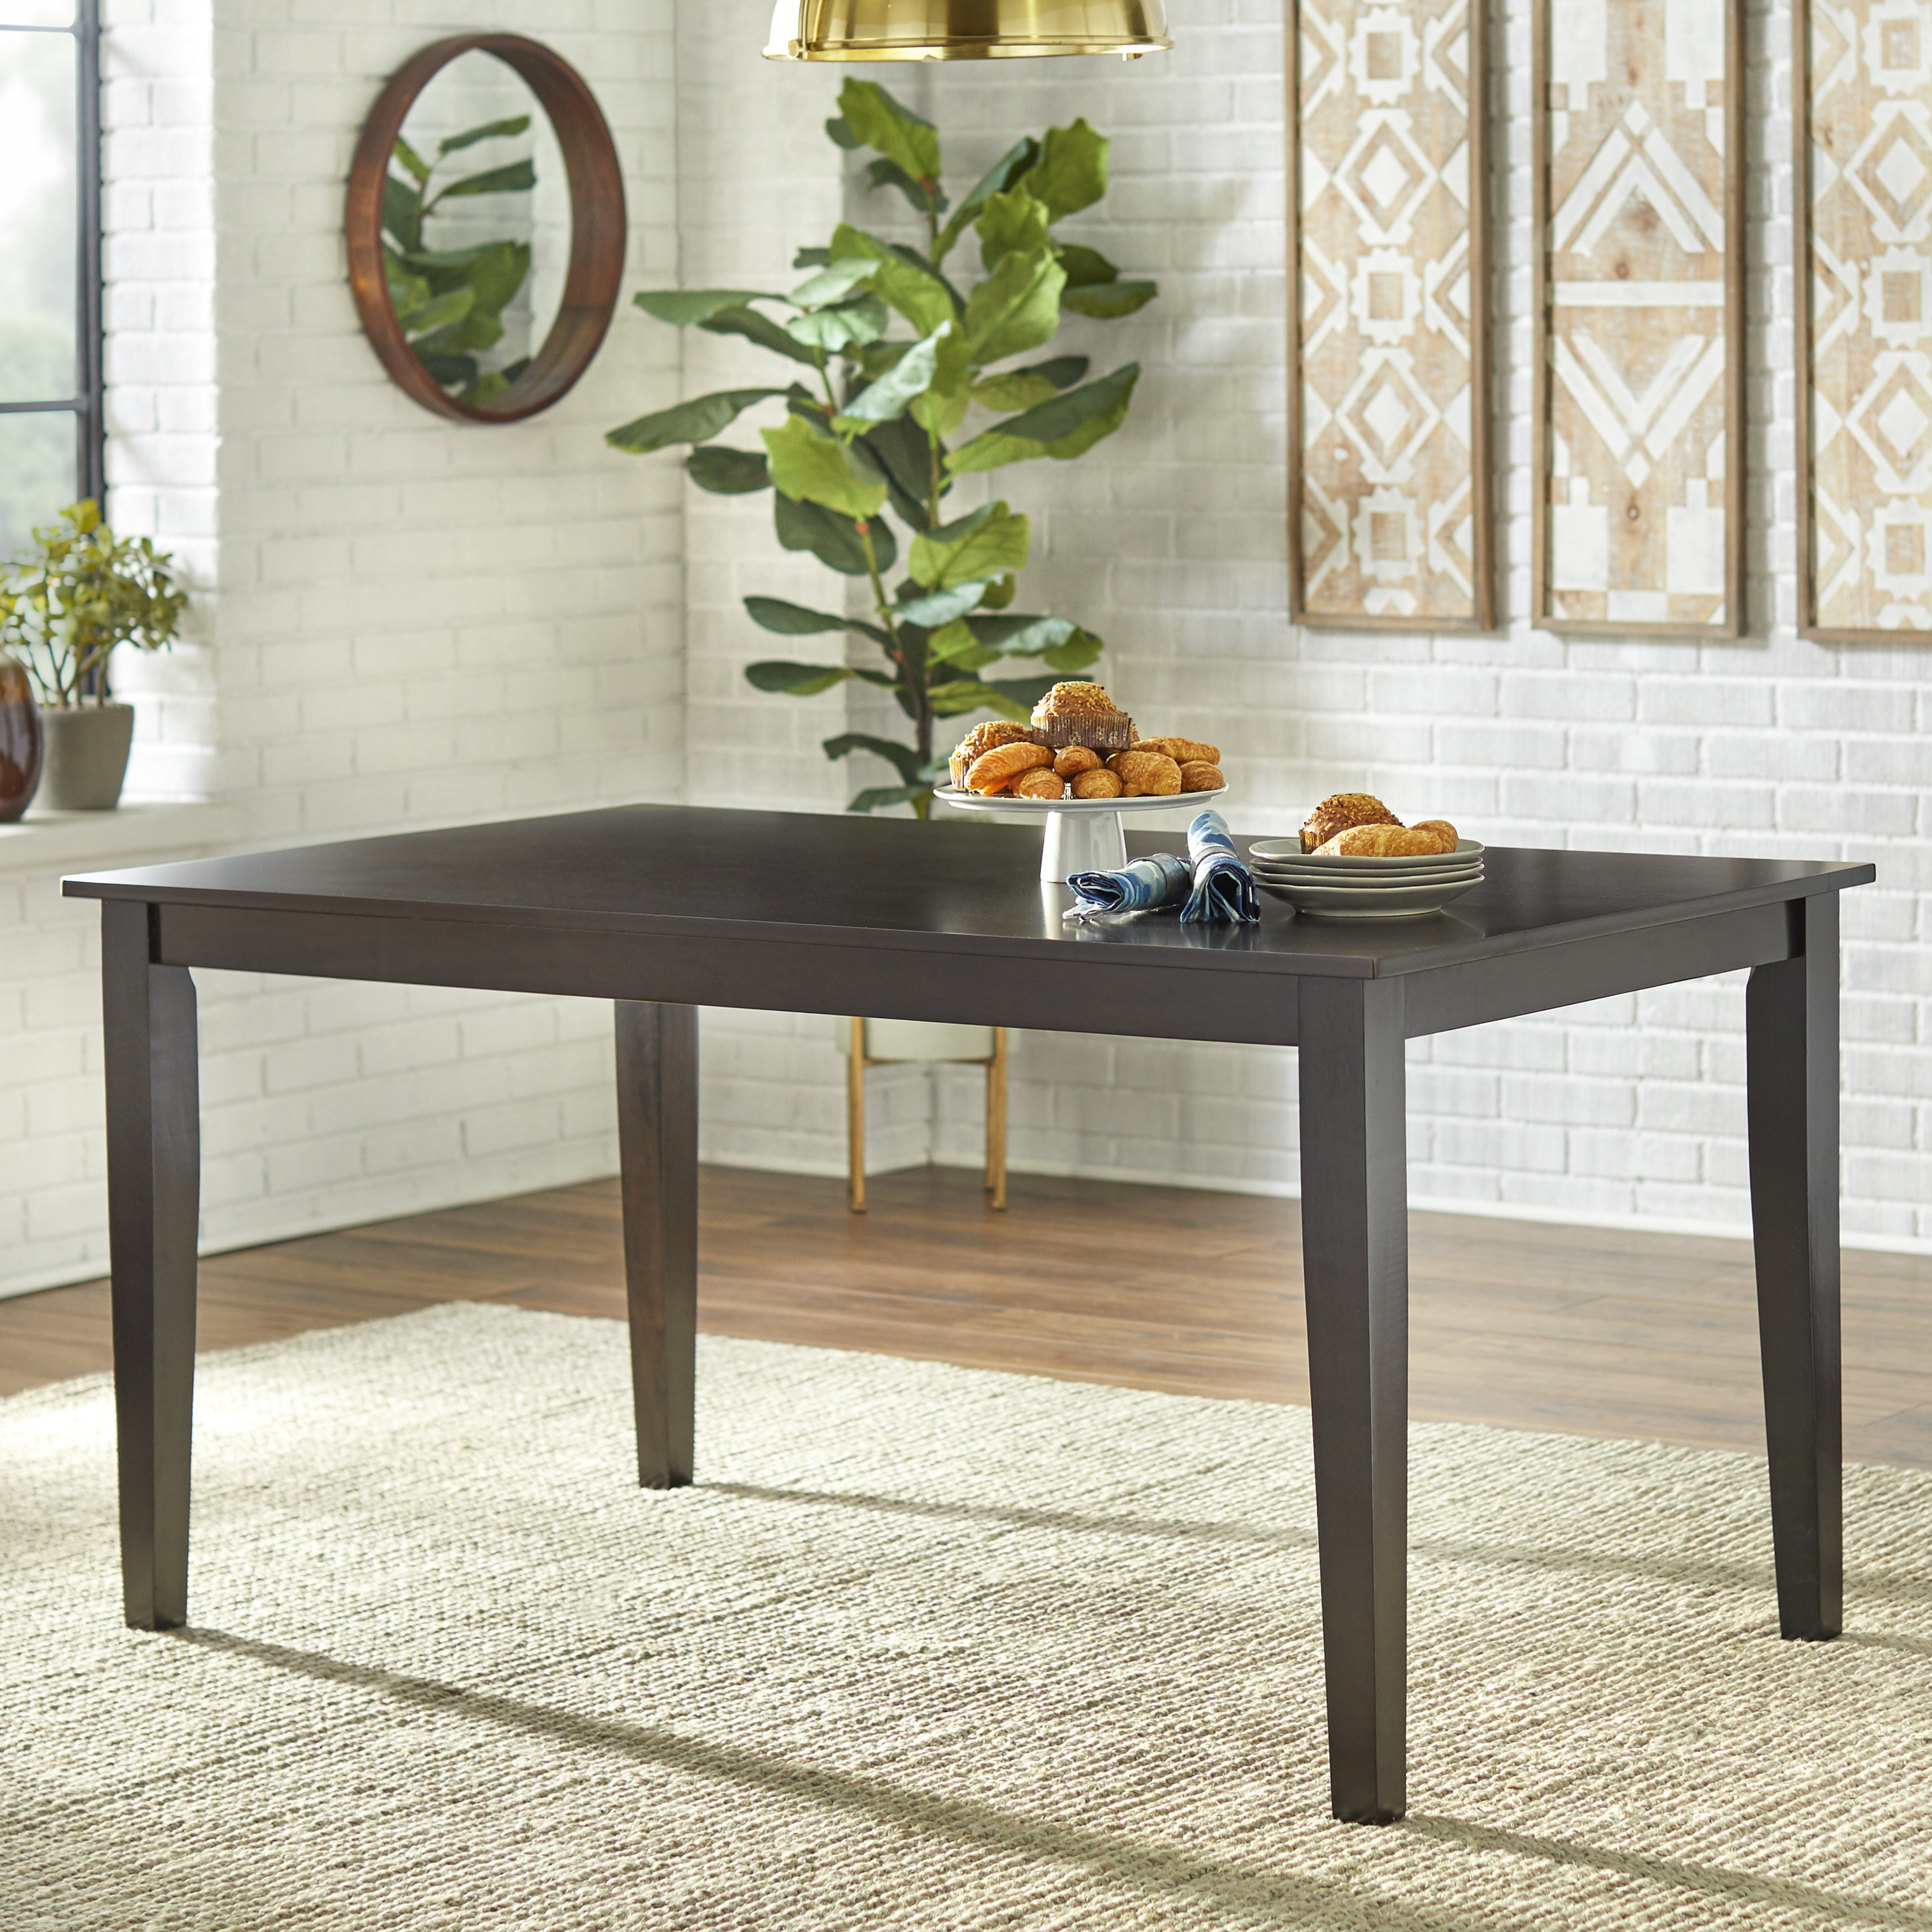 TMS Mid-Century 60" Indoor Dining Table, Espresso - image 1 of 6